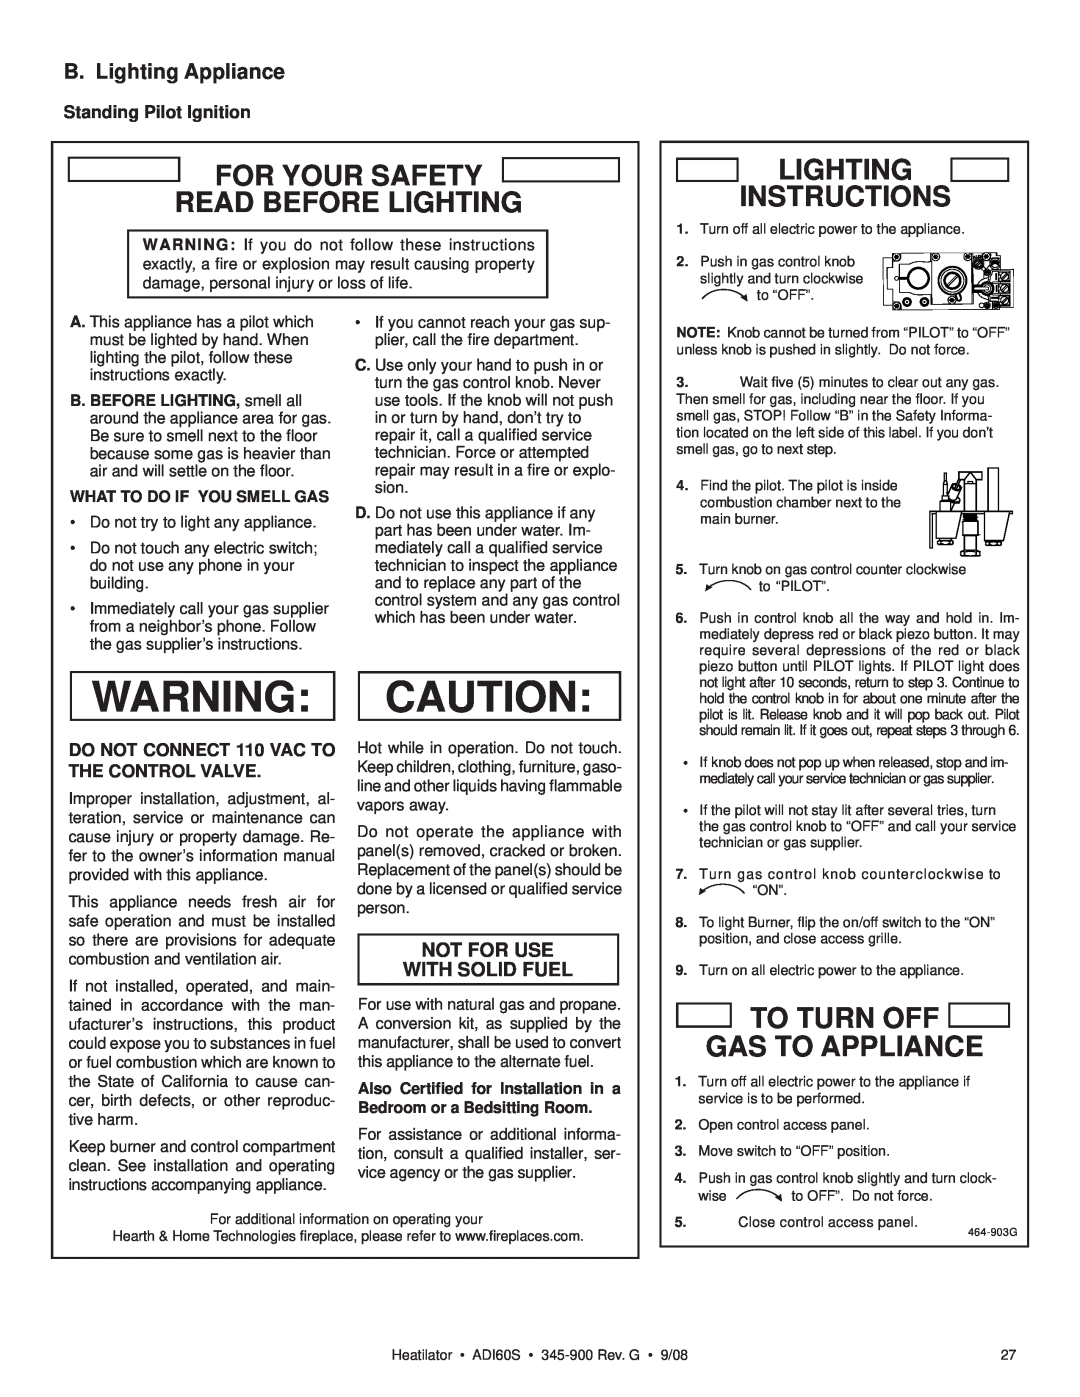 Heatiator ADI60S owner manual For Your Safety Read Before Lighting, Lighting Instructions, To Turn Off Gas To Appliance 